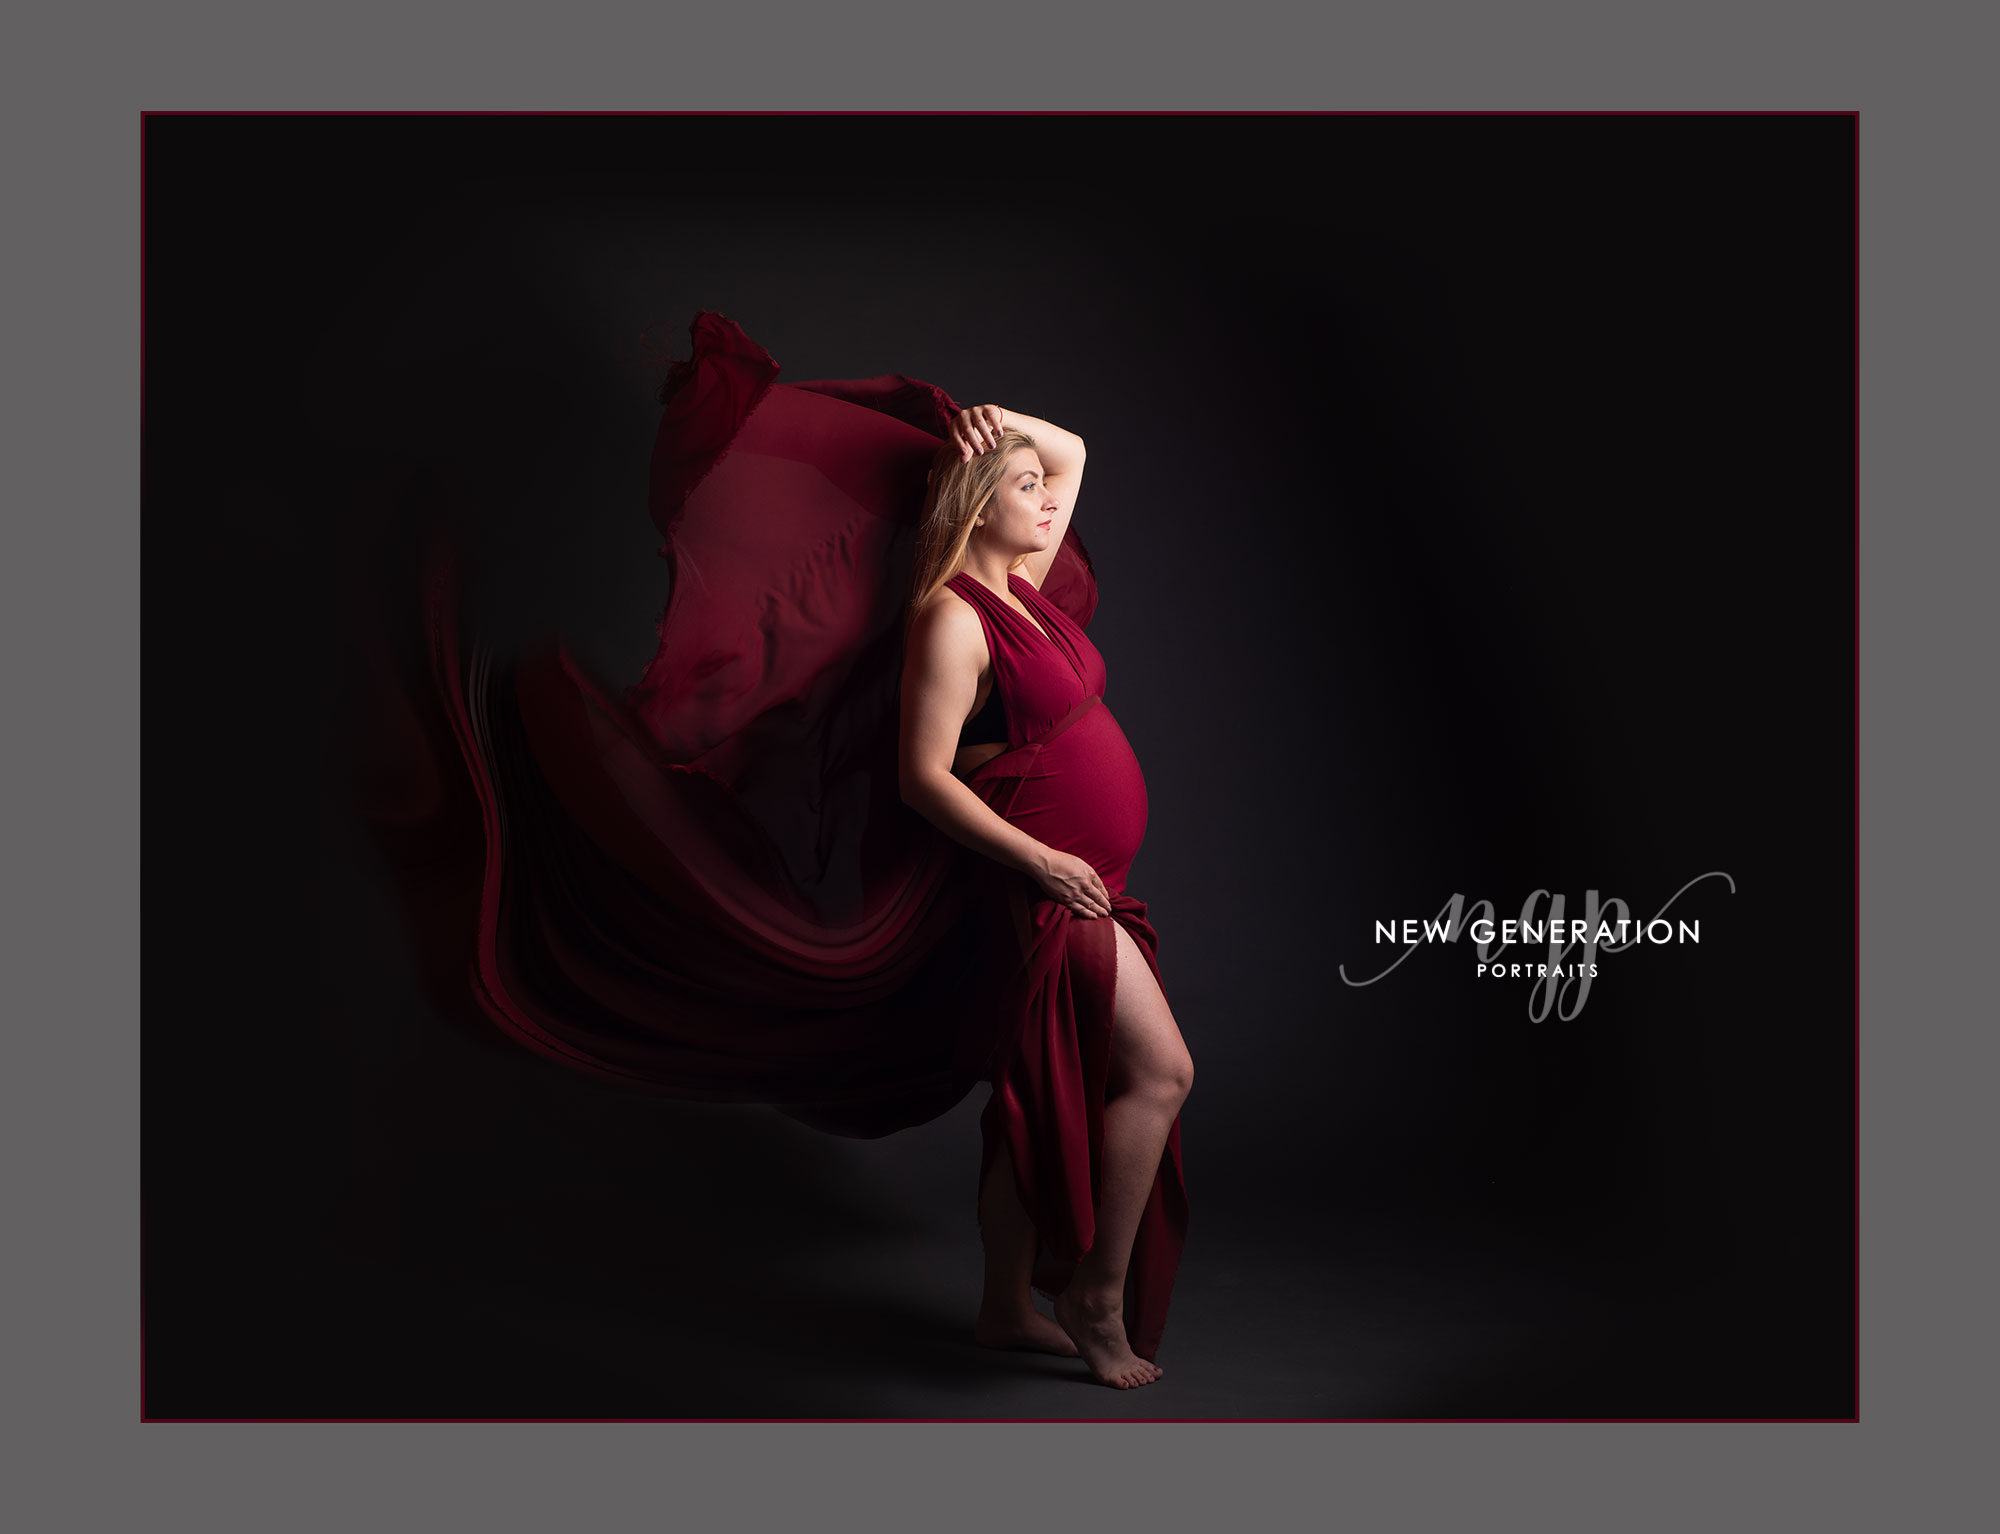 Pregnant lady In red bellowing dress side on showing profile of her bump.Captured by New Generation Portraits.